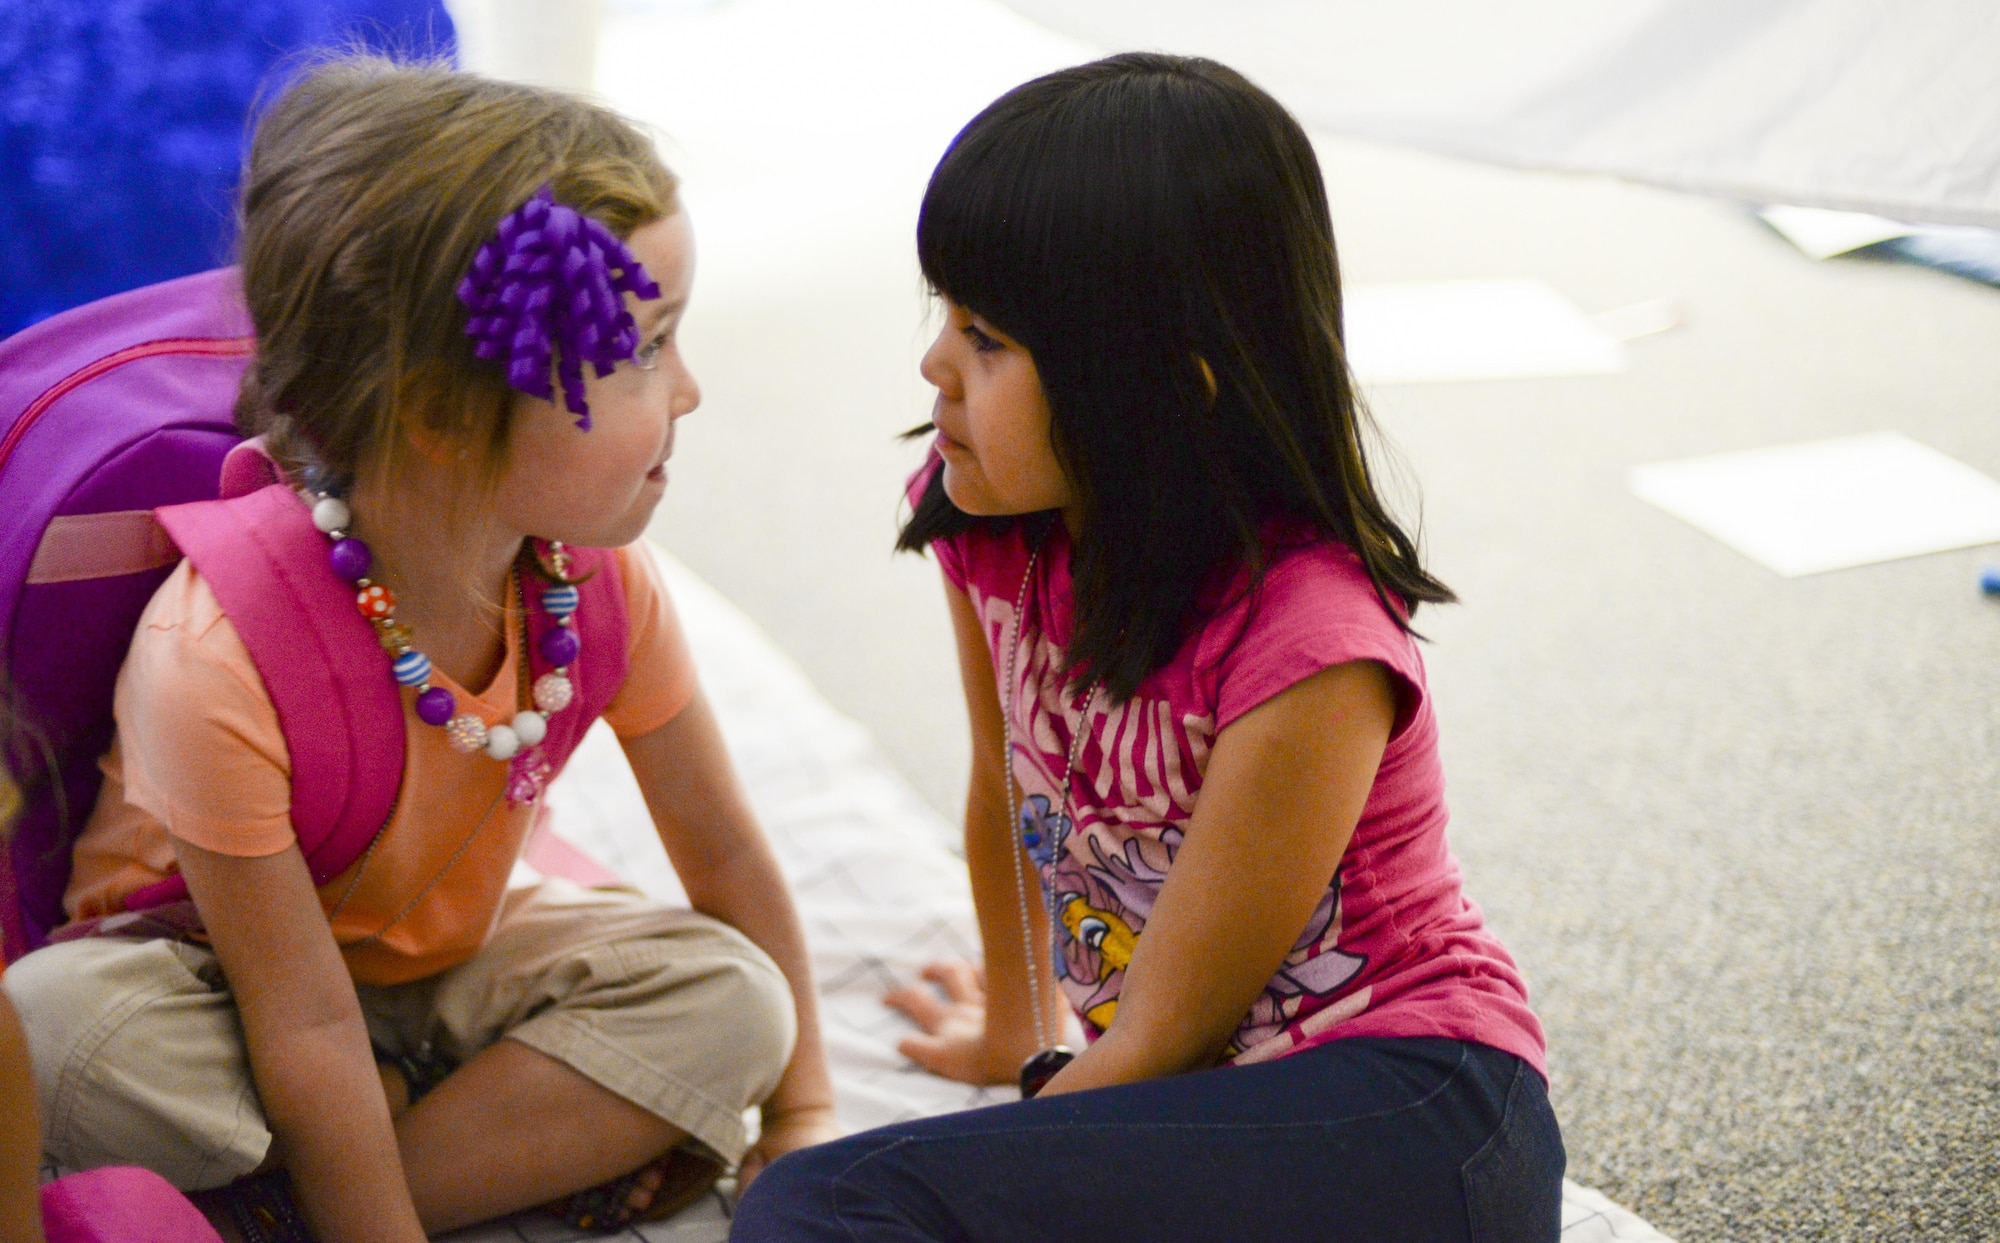 Sienna and Annalyse, two children attending the base chapel’s vacation bible school, talk to one another during a volunteer-led discussion at Holloman Air Force Base, N.M., on July 20. Holloman Chapel’s vacation bible school is a five-day program, offered to elementary aged children. (Last names are being withheld due to operational requirements. U.S. Air Force photo by Amn Alexis P. Docherty/released) 